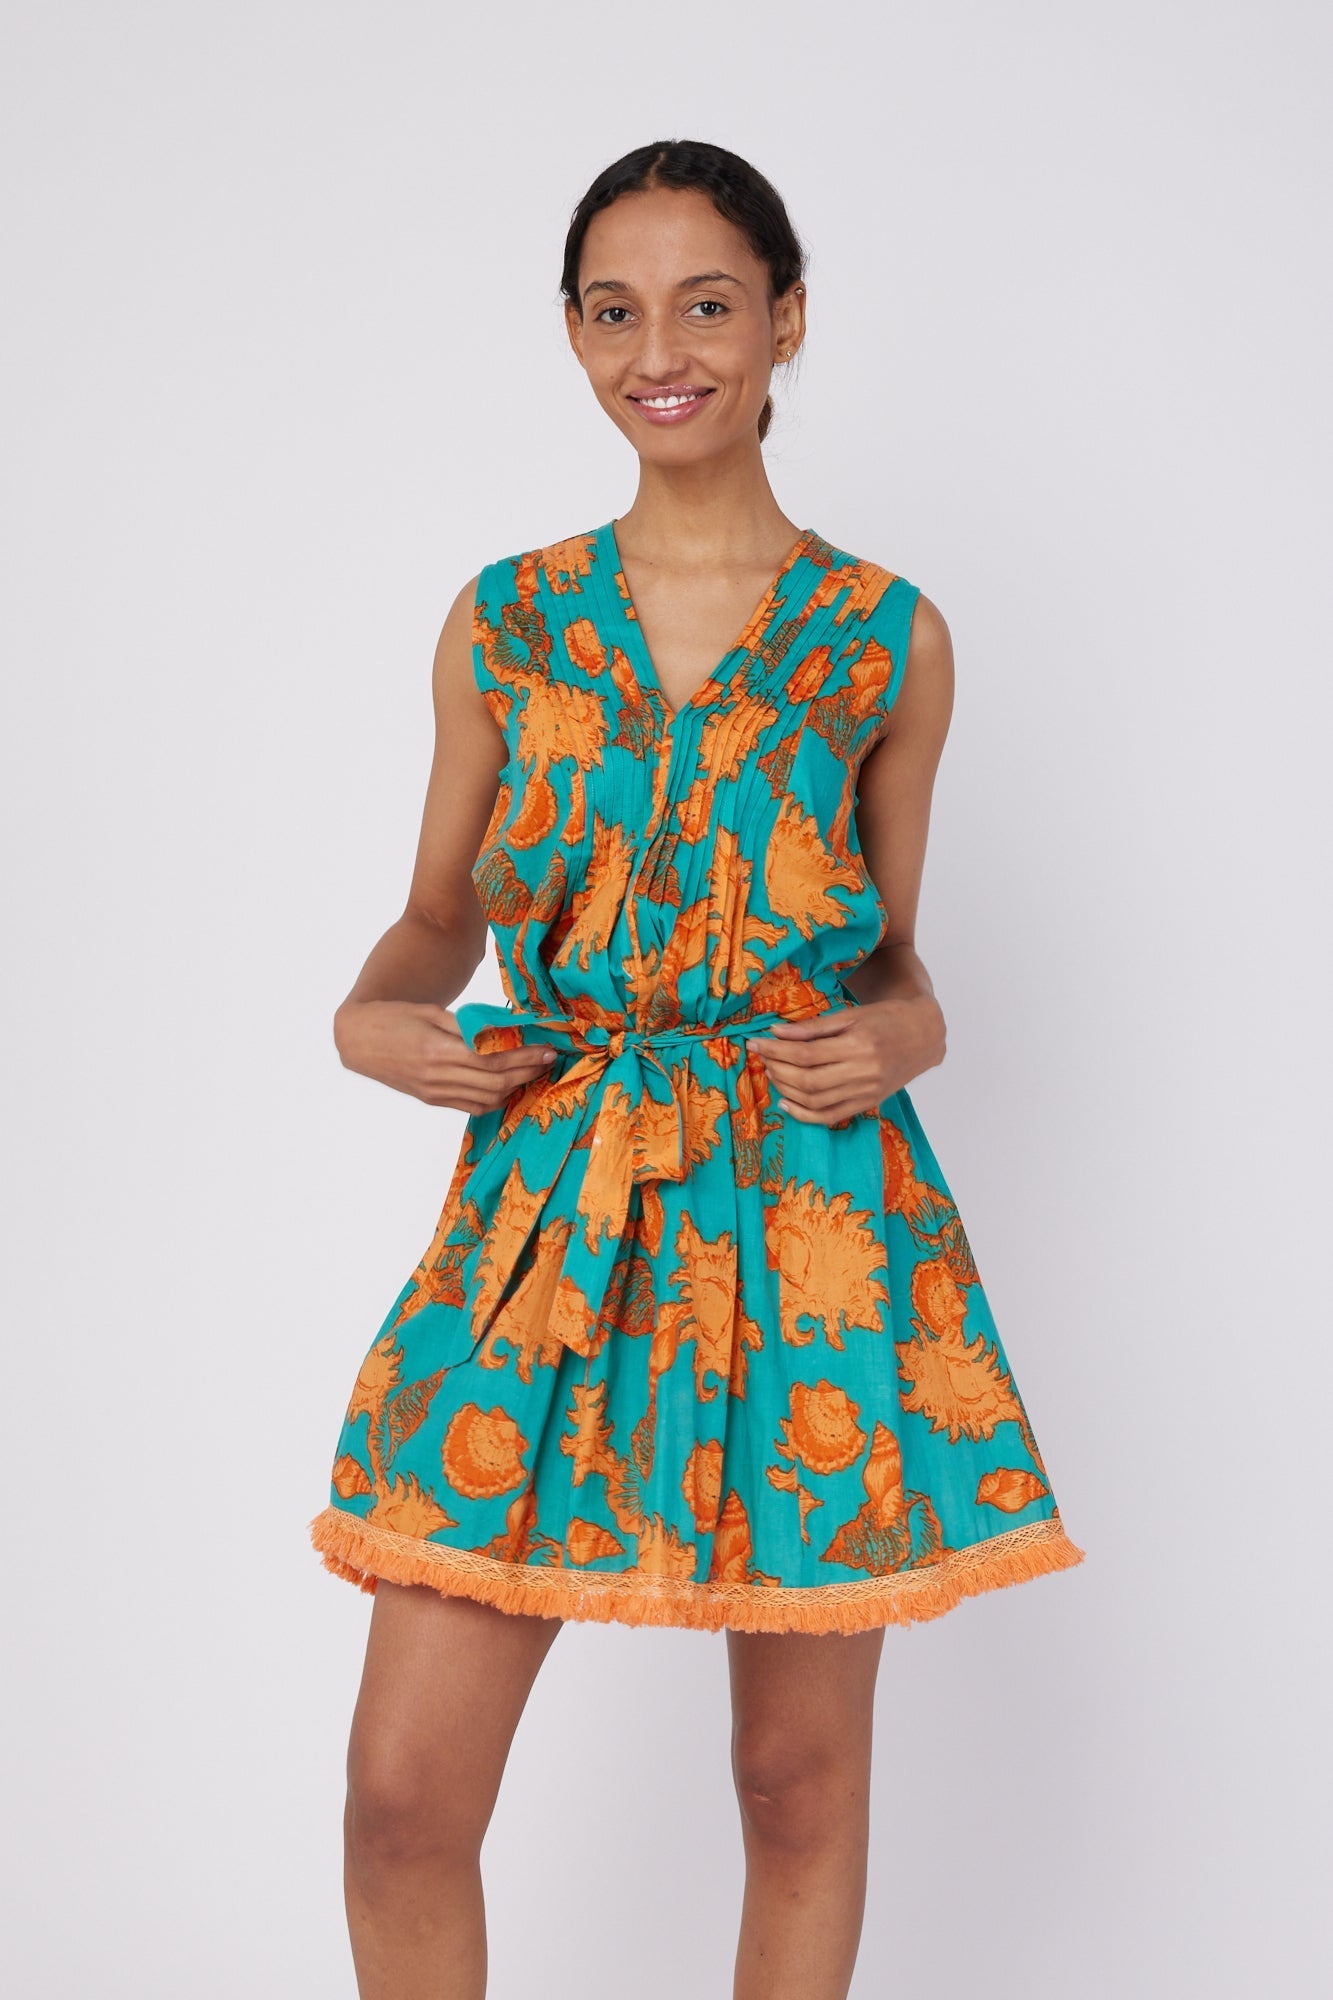 ModaPosa Felice Sleeveless V-Neck Puntuck Knee Length Dress with Detachable Belt in Turquoise Orange Shells . Discover women's resort dresses and lifestyle clothing inspired by the Mediterranean. Free worldwide shipping available!